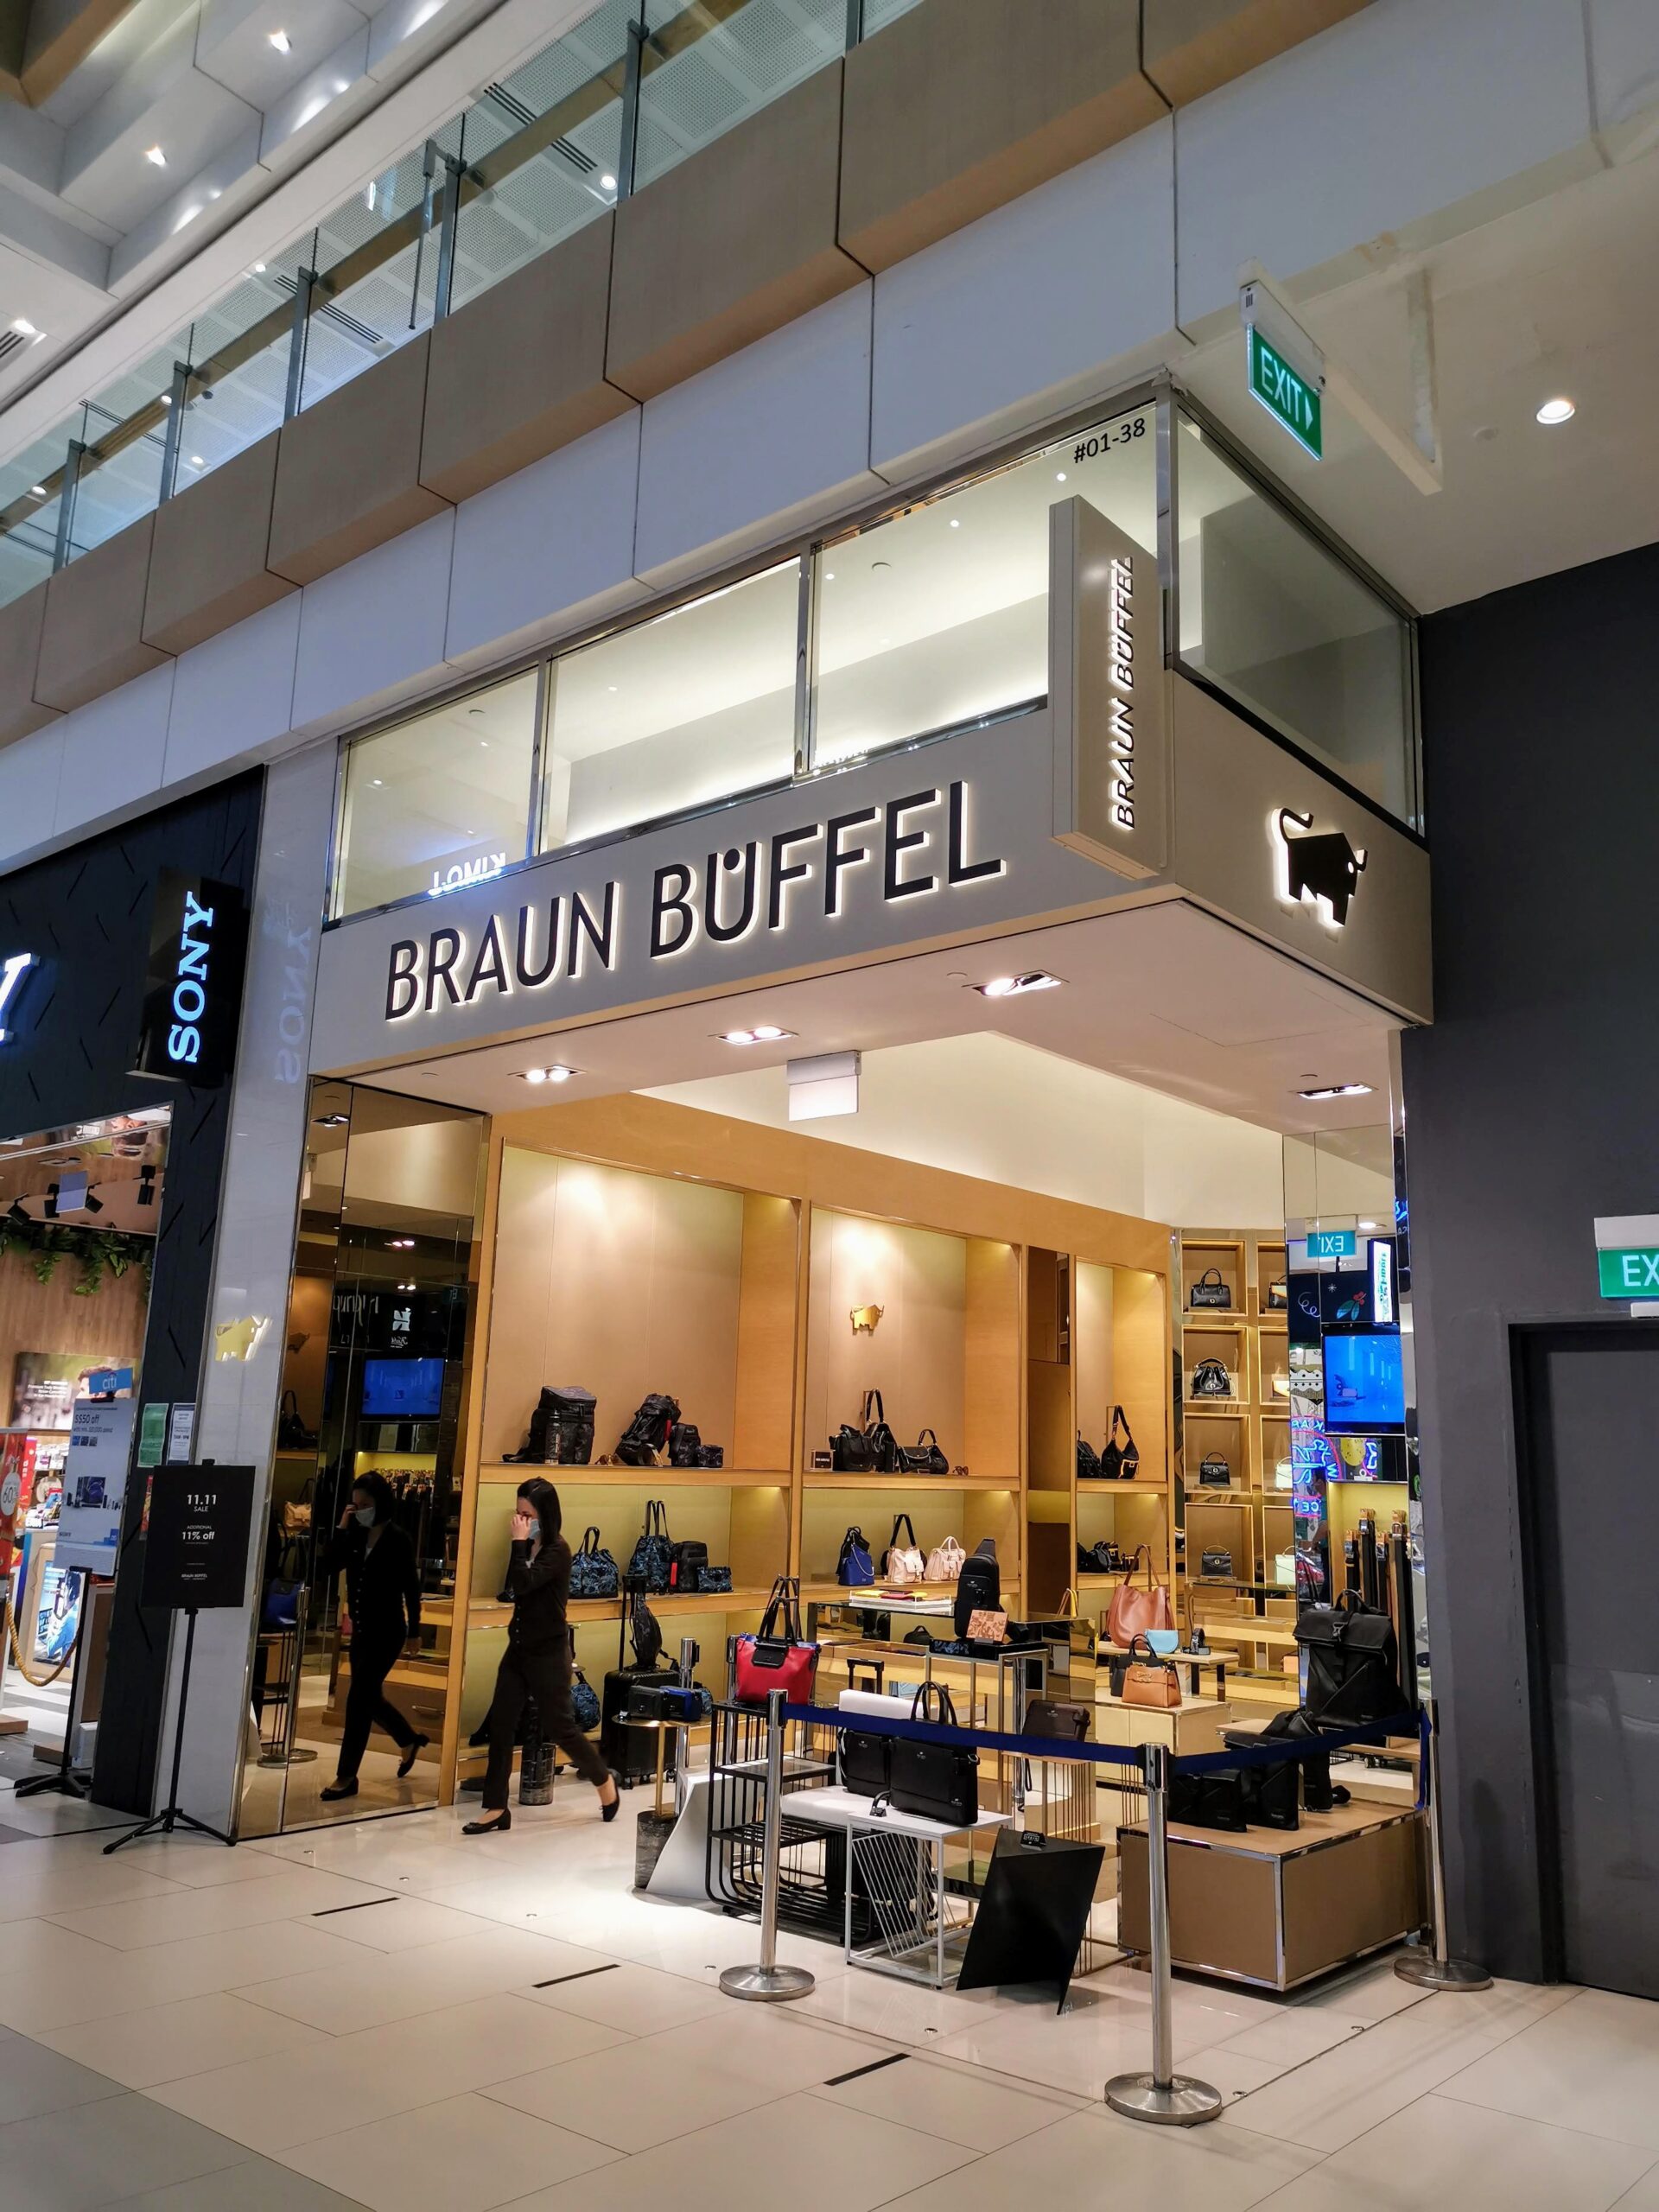 Braun buffel outlet in singapore